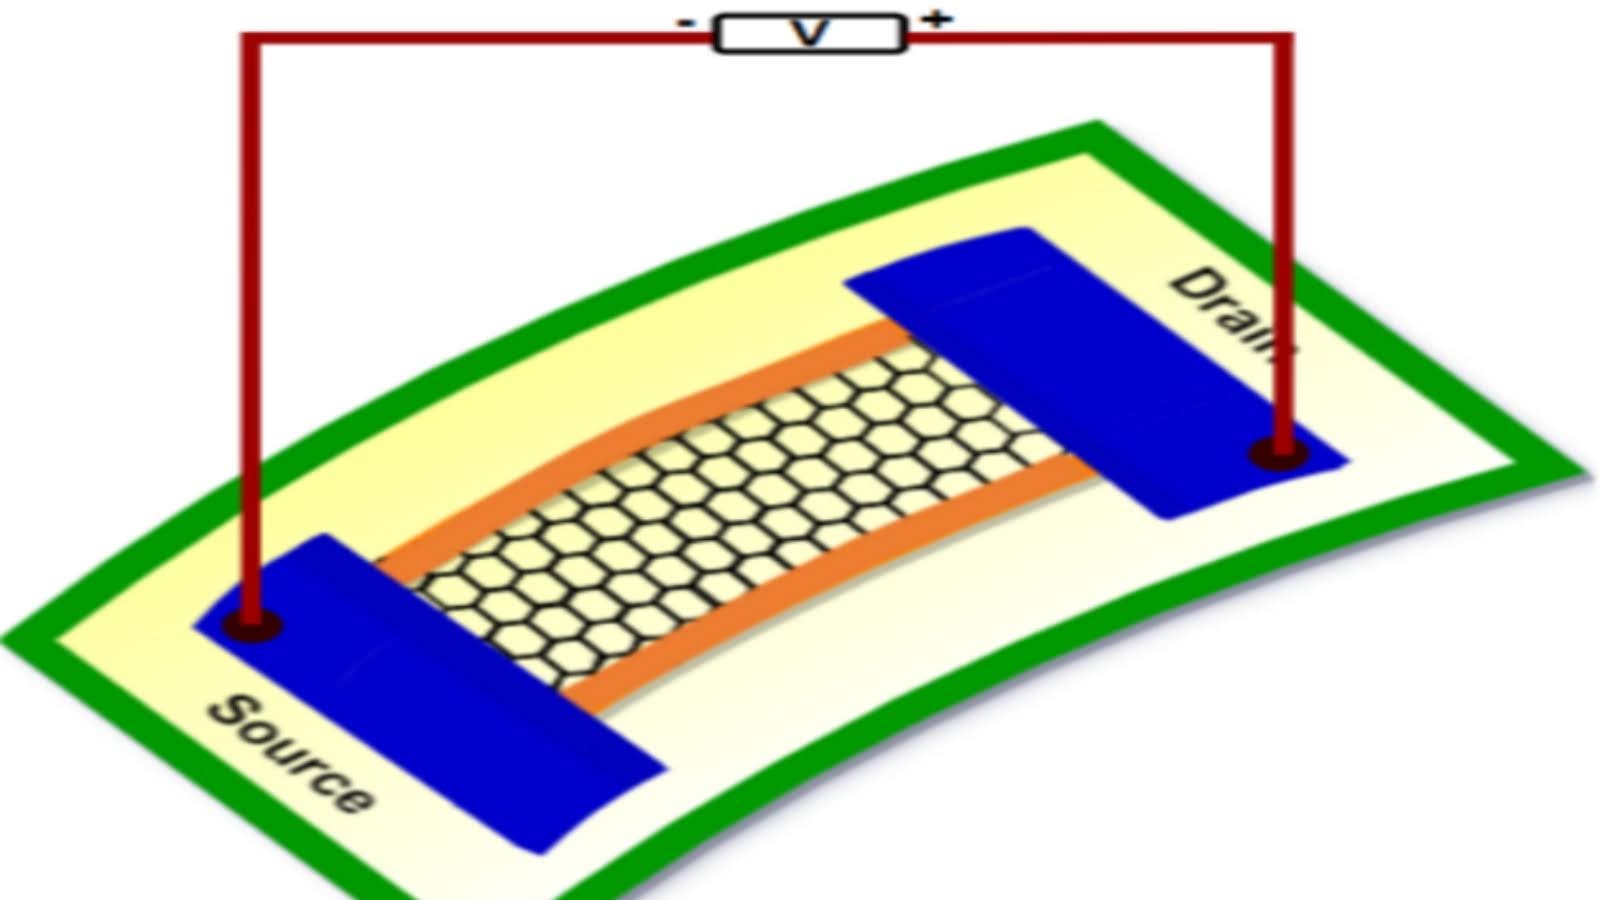 Strain-Resistant 'Buckled Xenes' Show Promise in Flexible Electronics - Research Matters